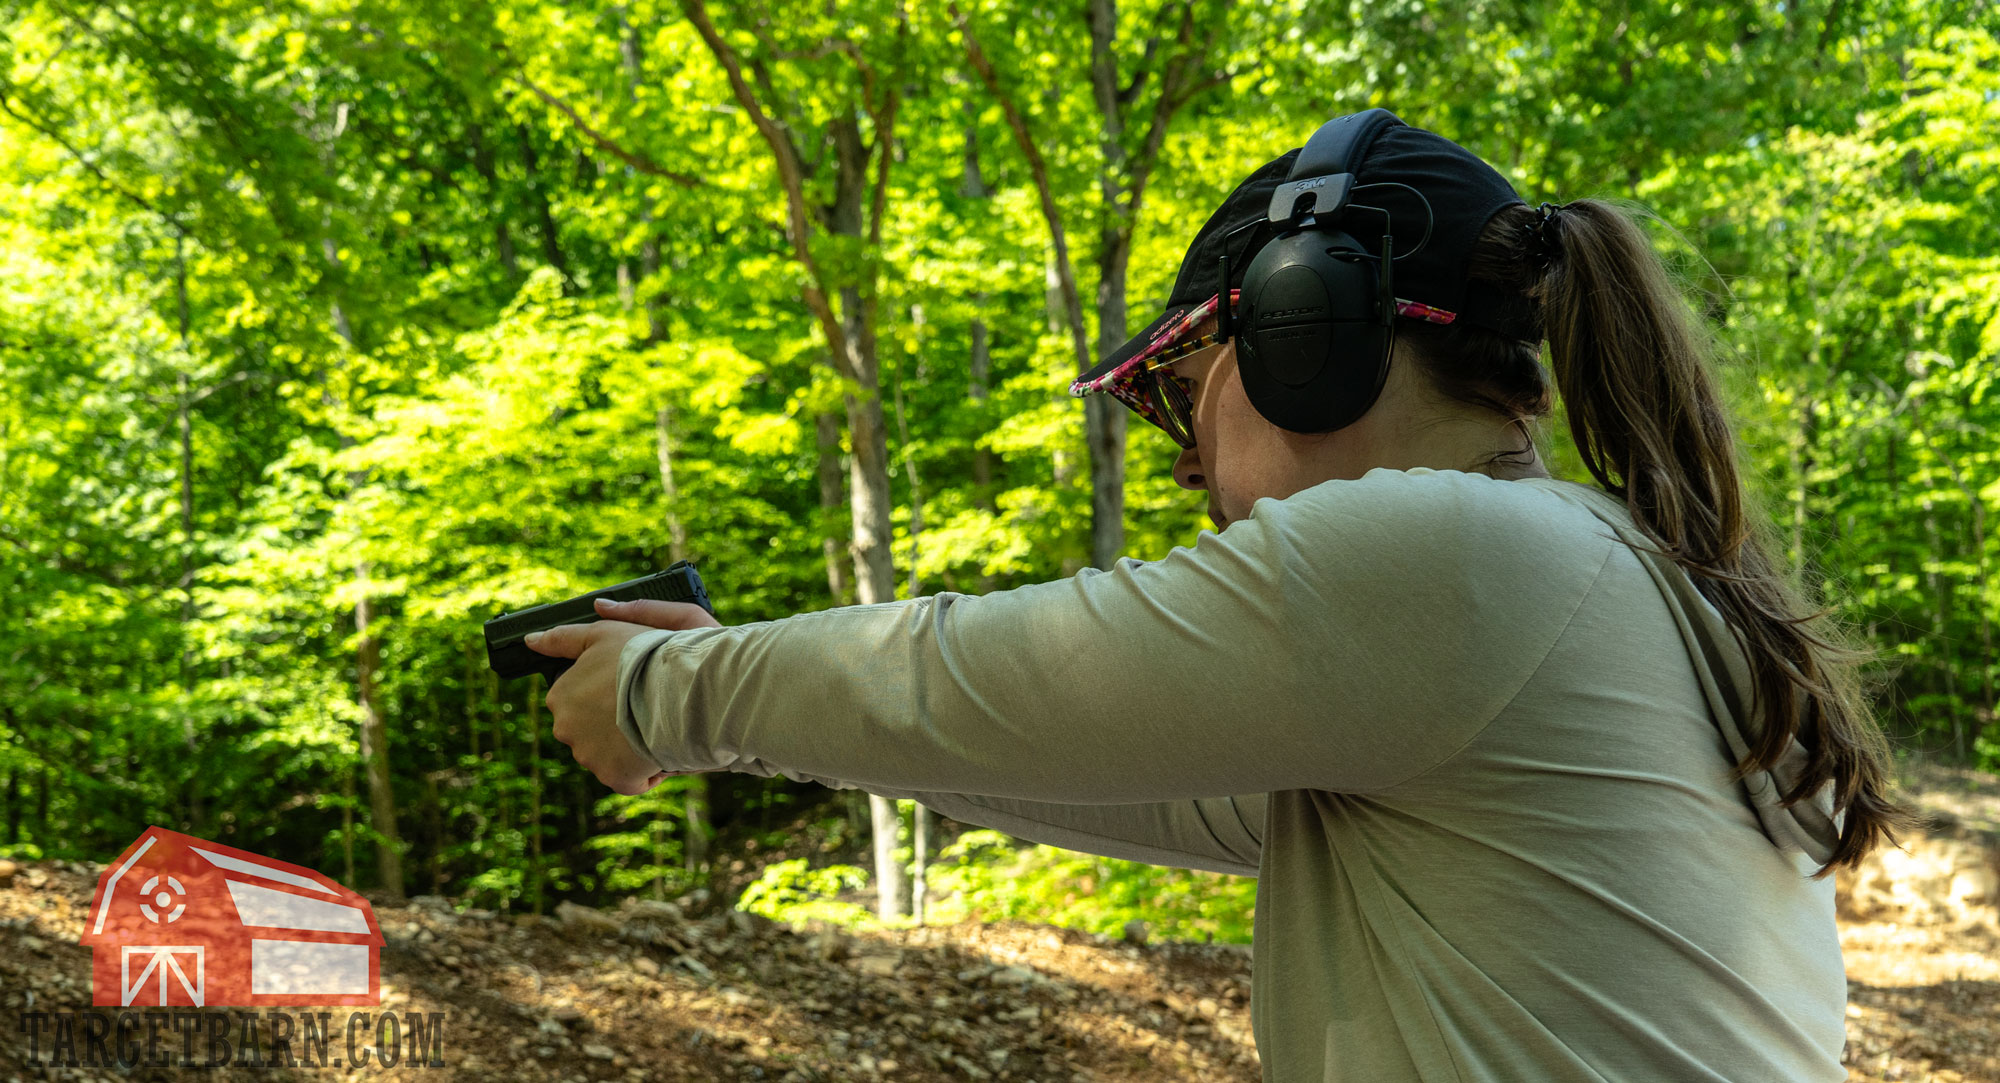 the author shooting a smith & wesson m&p pistol at the range